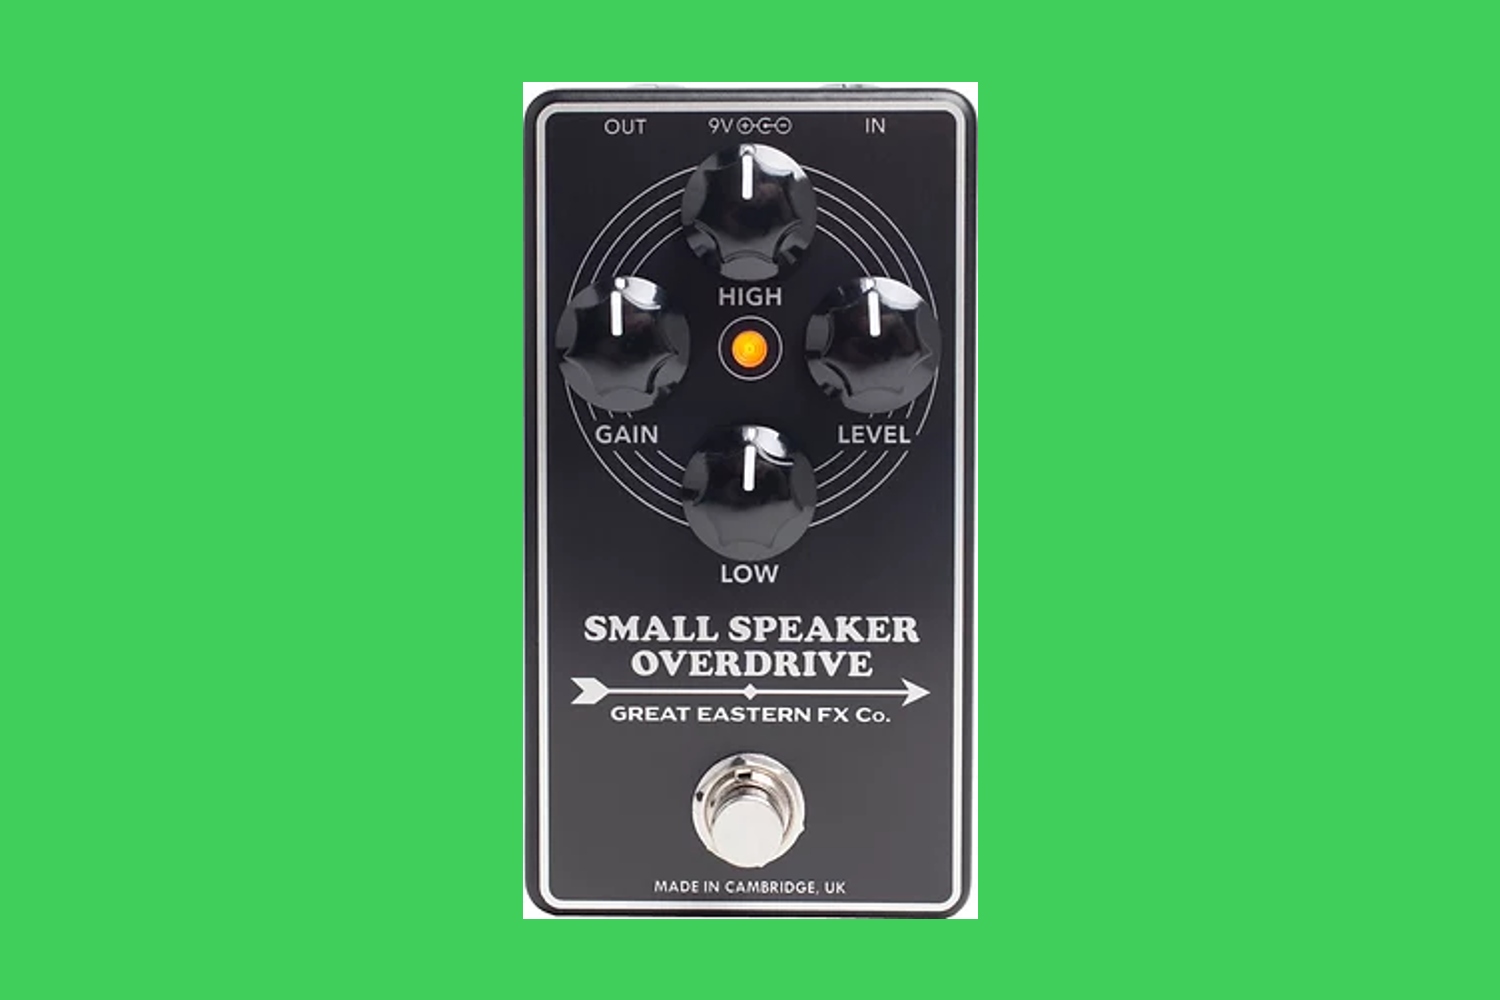 Great Eastern FX drop the Small Speaker Overdrive